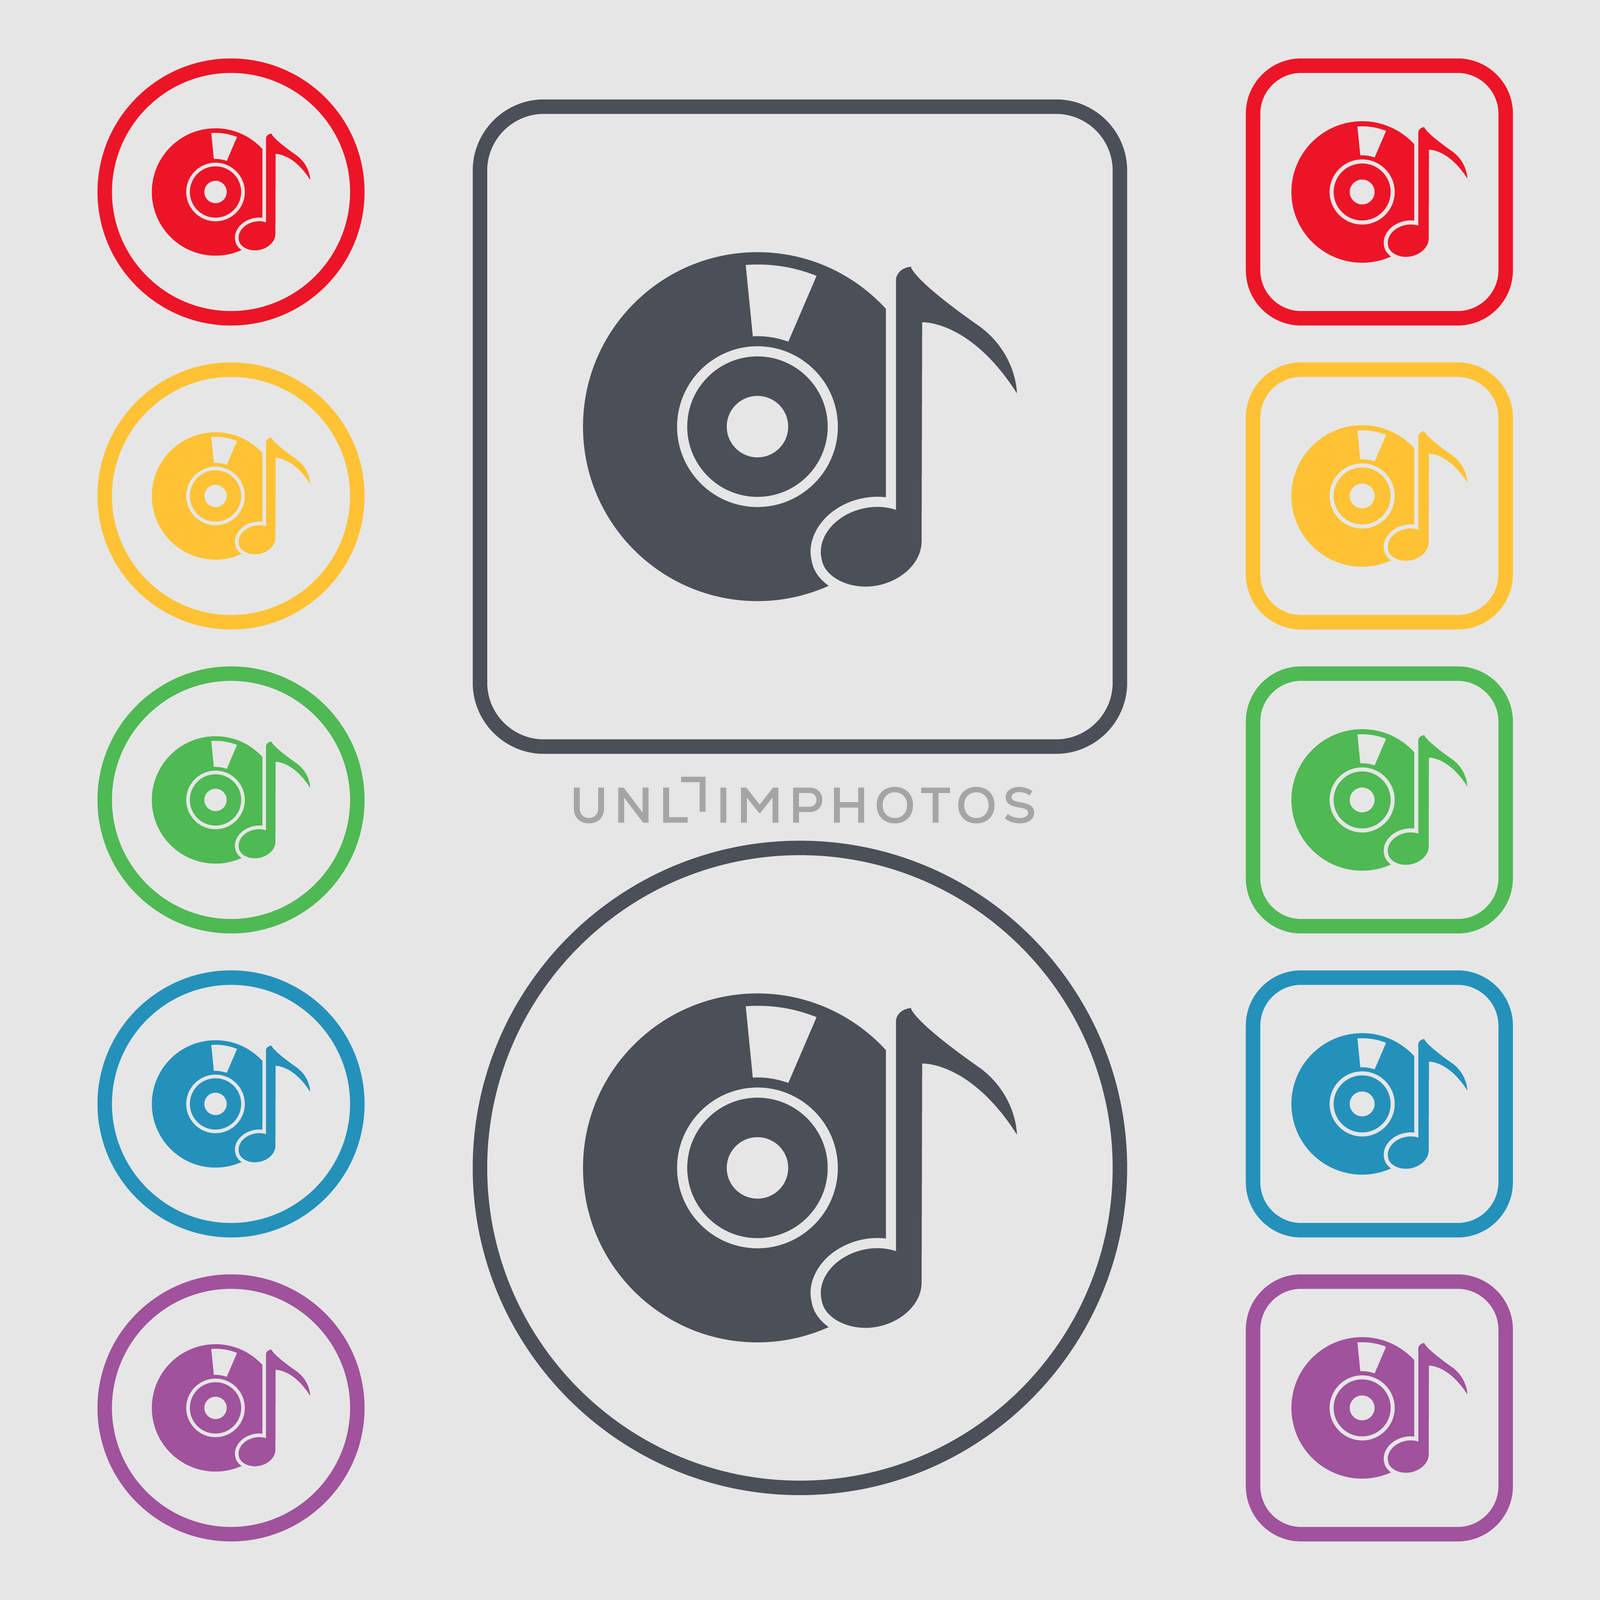 CD or DVD icon sign. Symbols on the Round and square buttons with frame. illustration